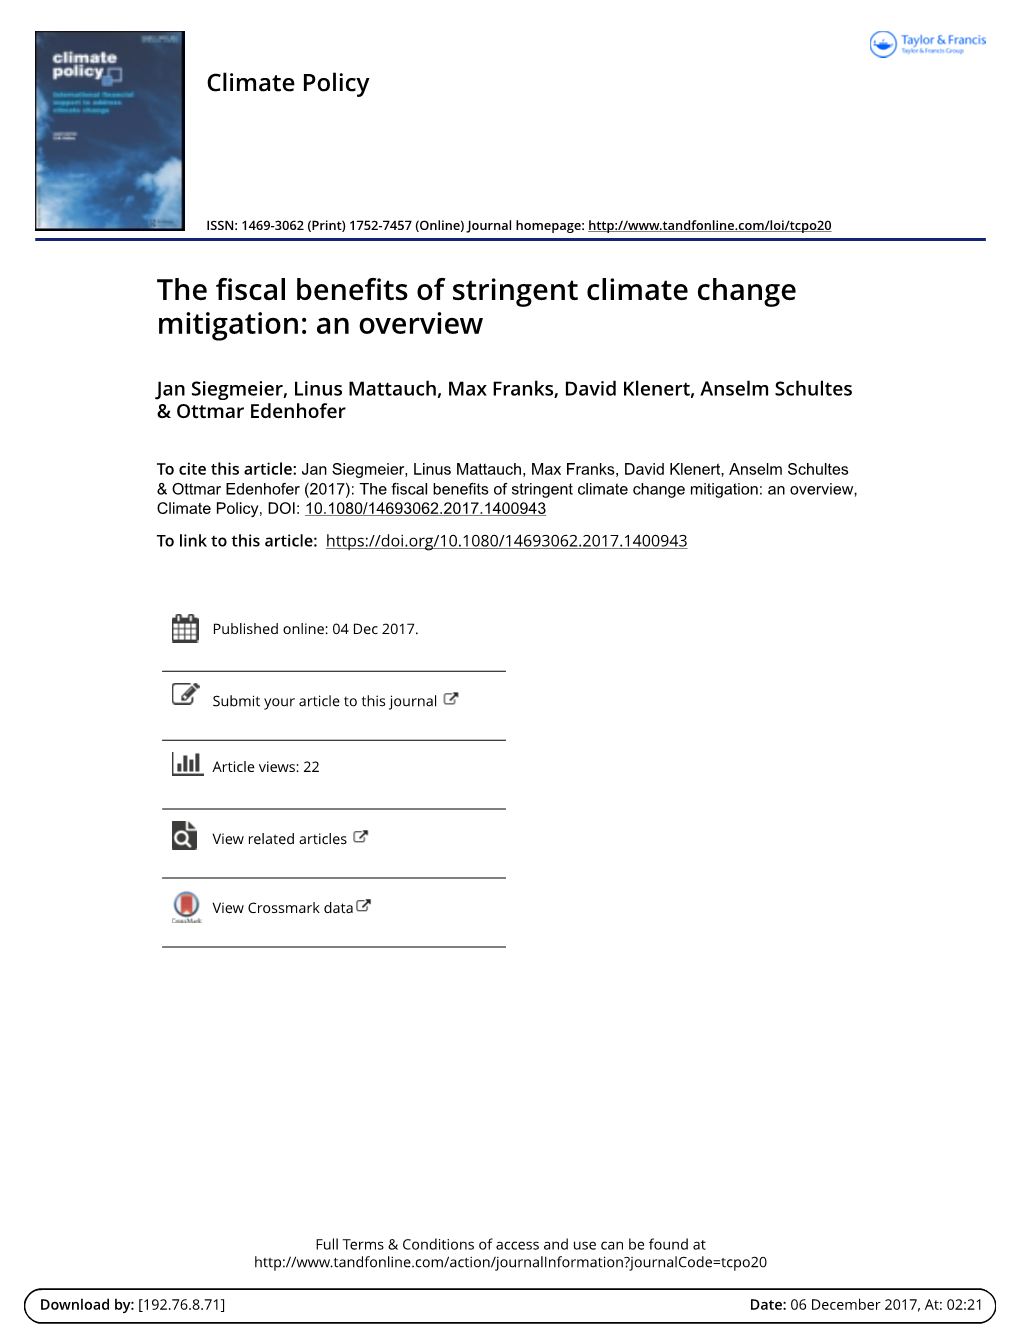 The Fiscal Benefits of Stringent Climate Change Mitigation: an Overview